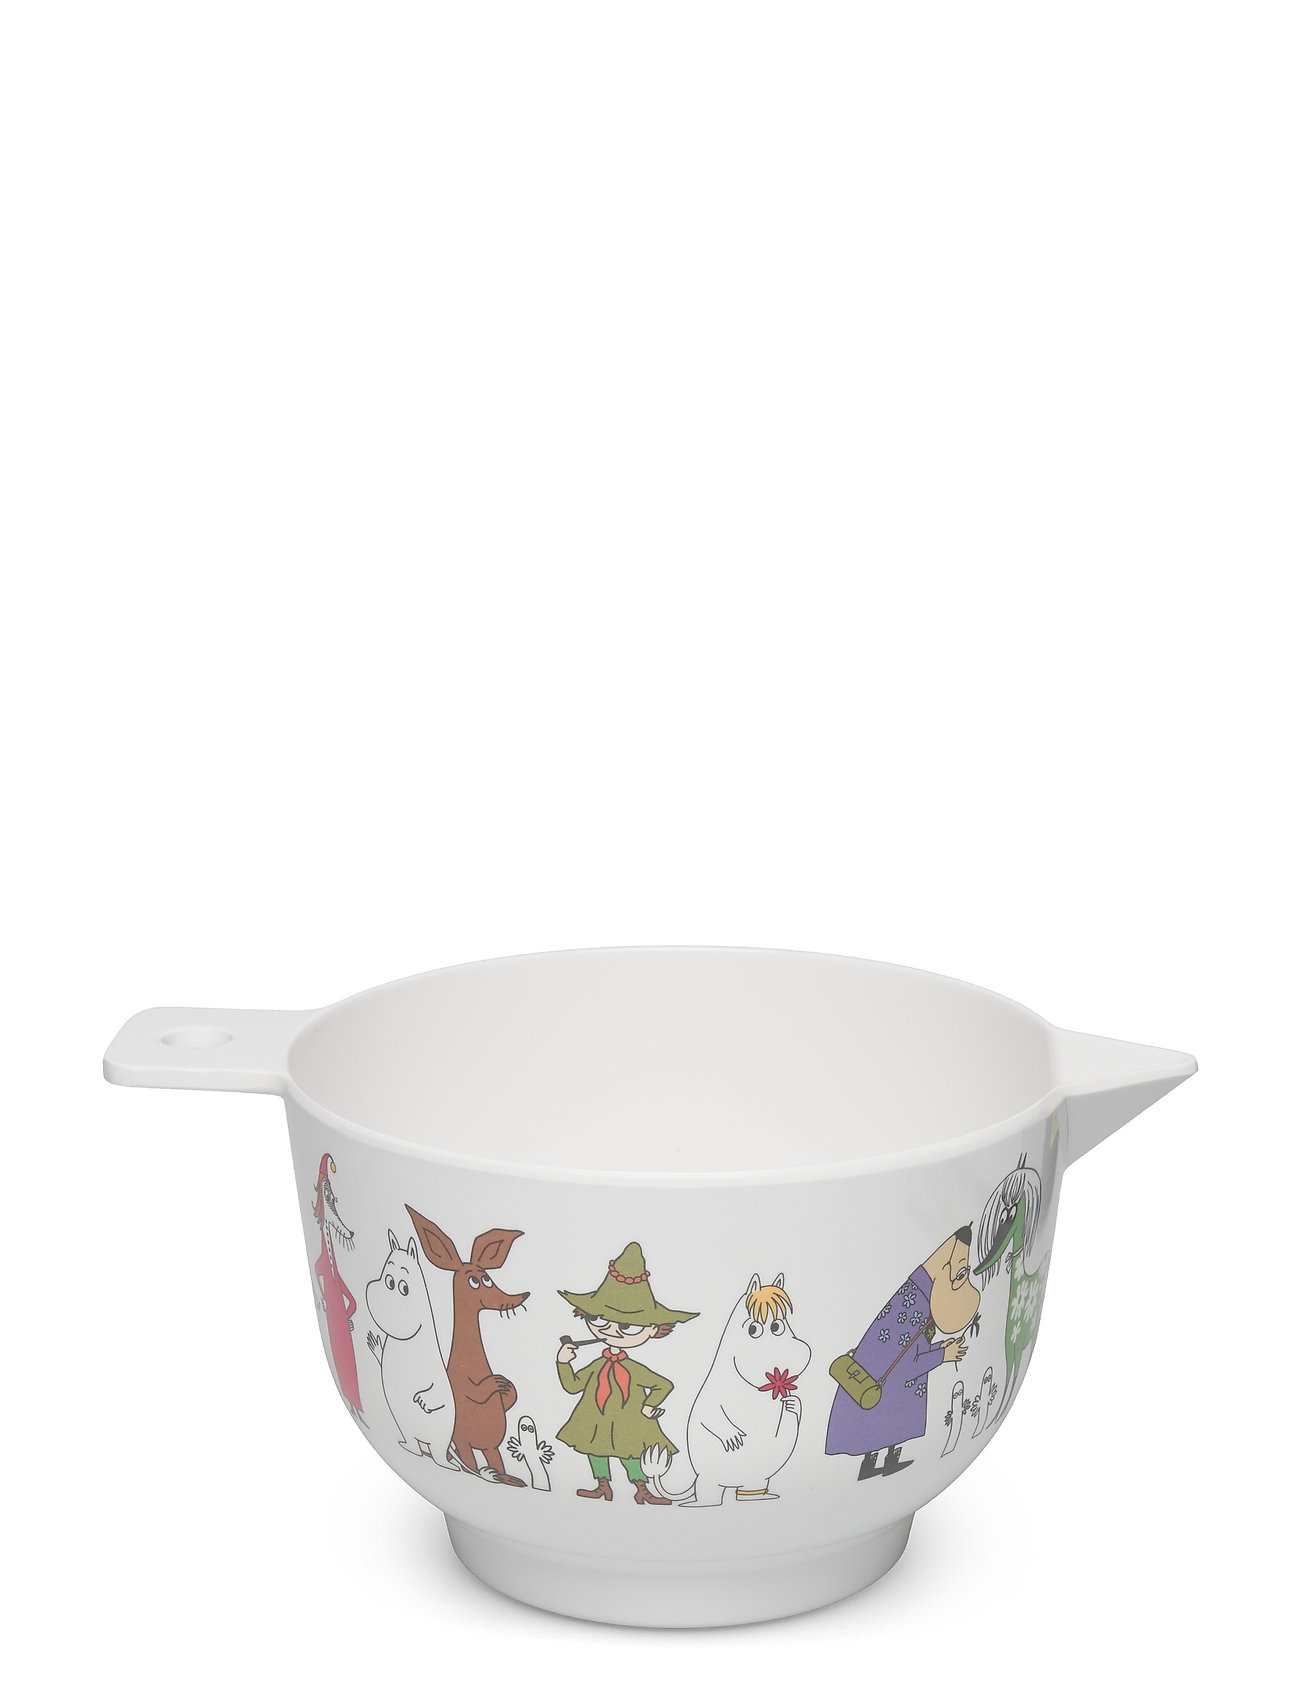 Moomin Melamine Bowl L Home Meal Time Baking & Cooking Mixing Bowls Multi/patterned Martinex